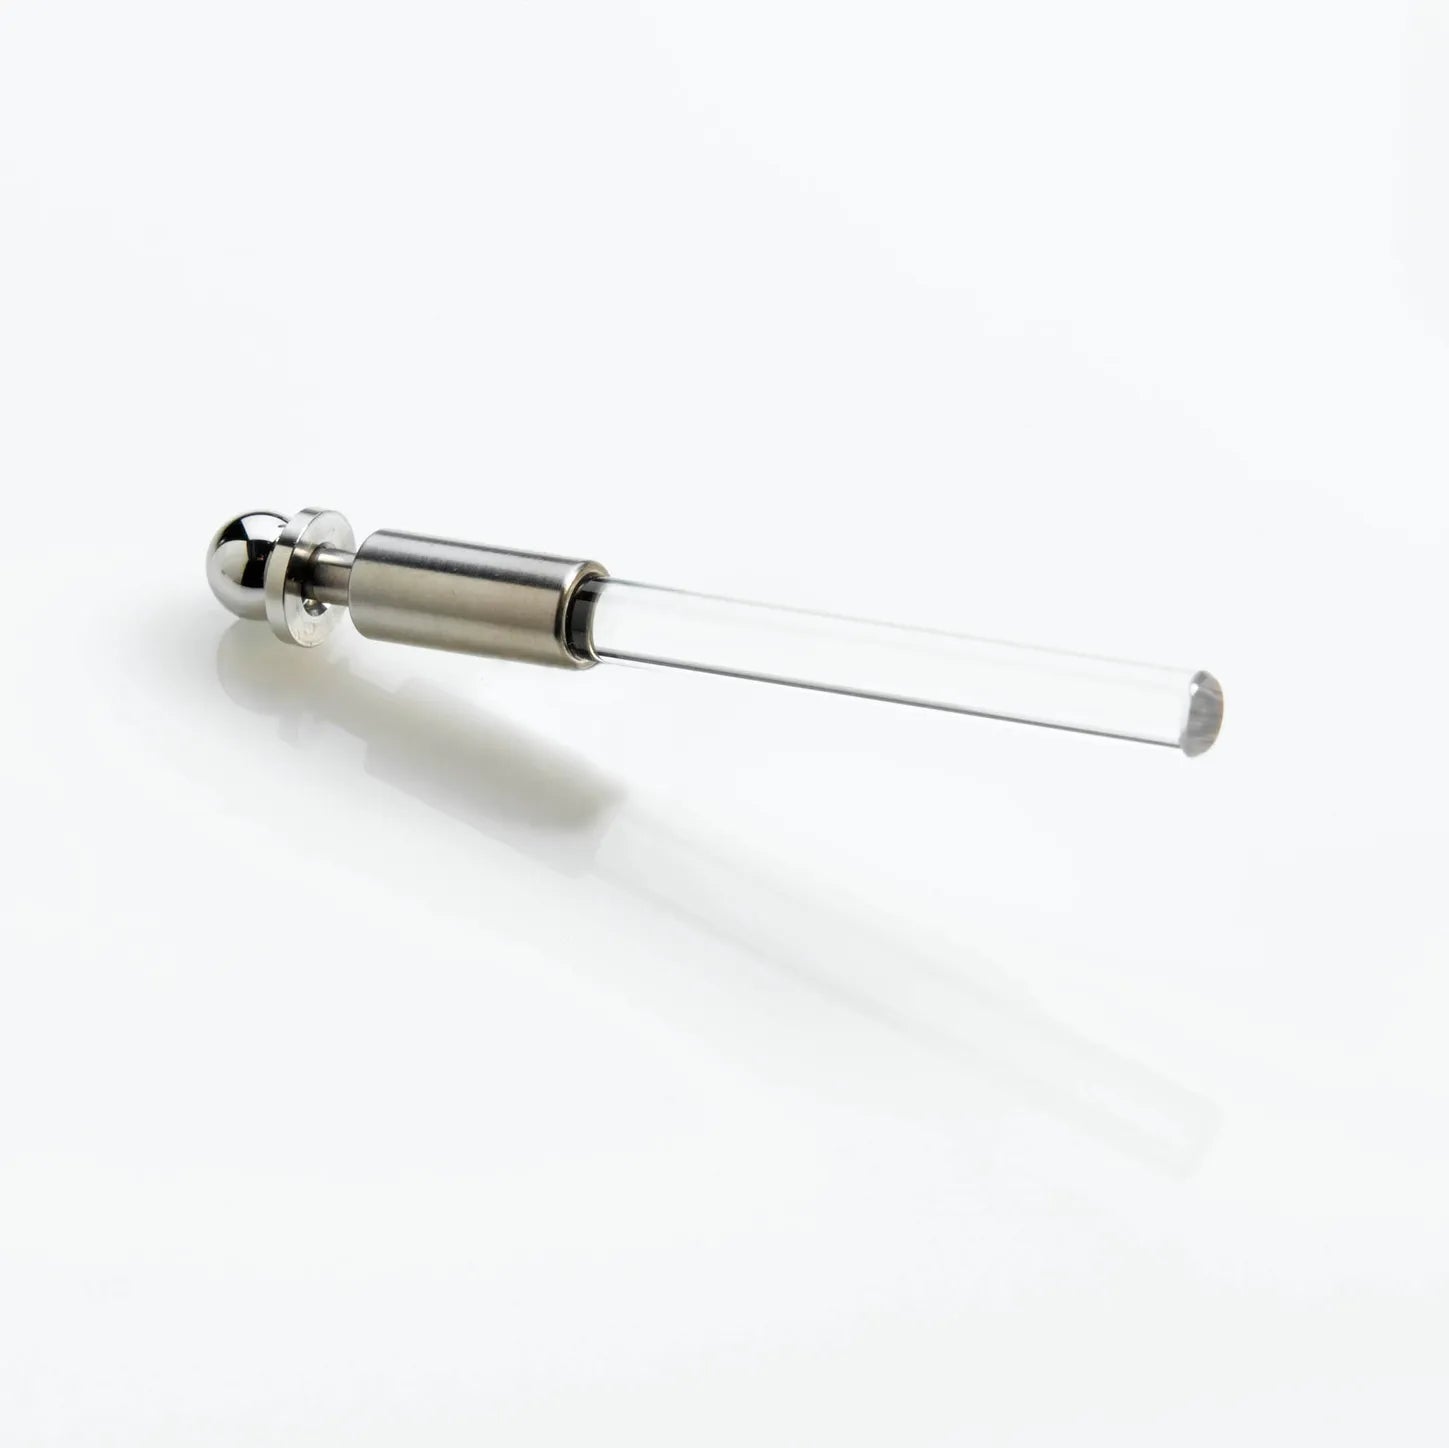 Sapphire Plunger, Comparable to Beckman® # 240714